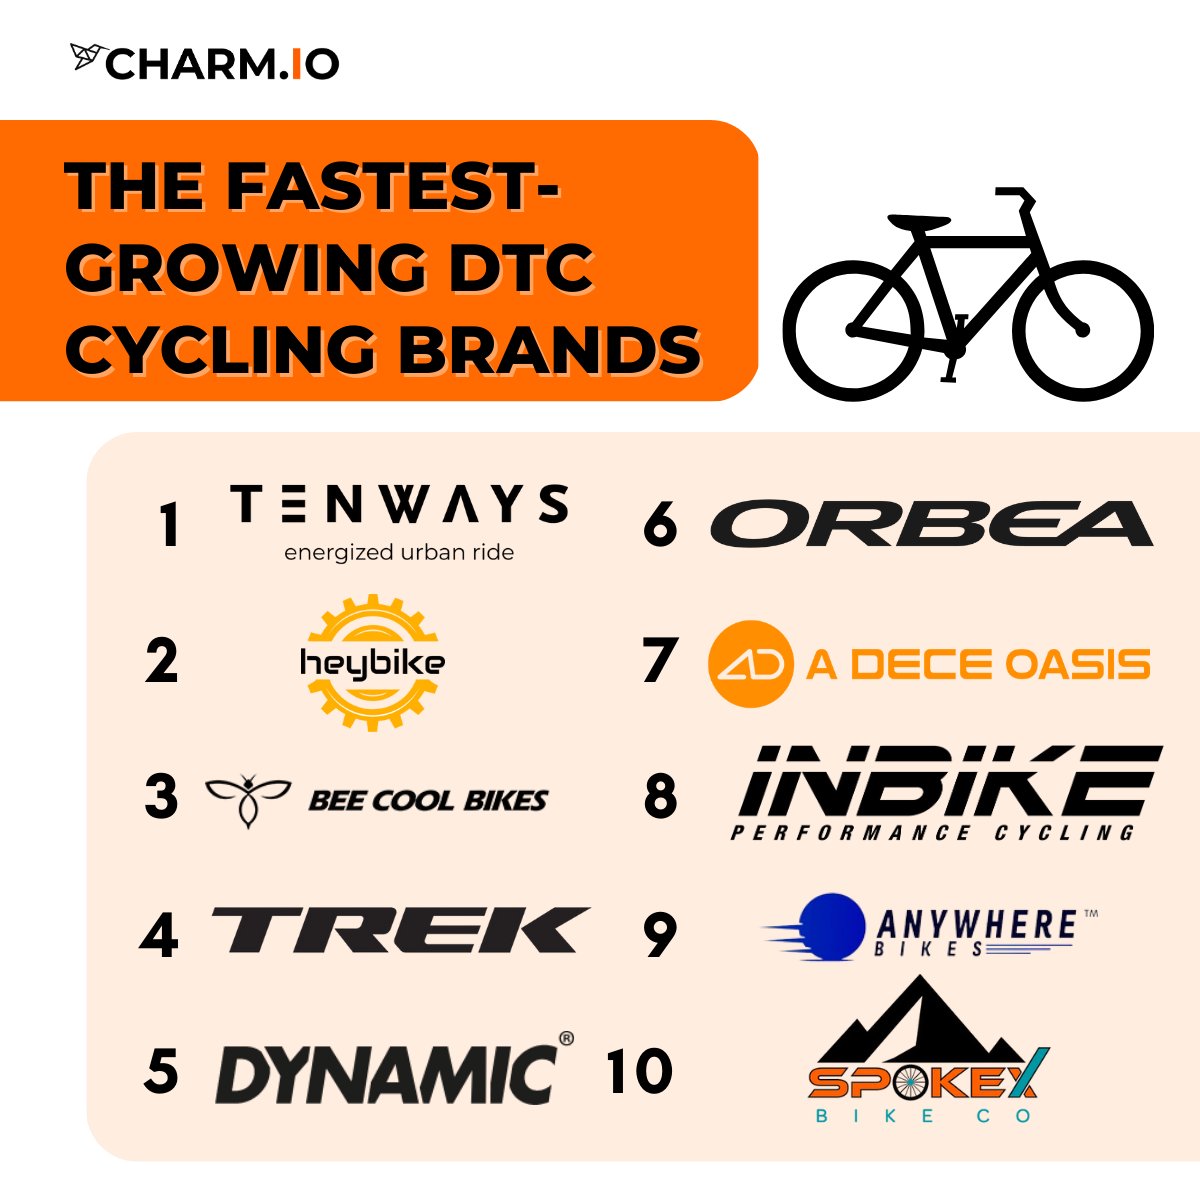 From traditional bikes to e-bikes, these are the fastest-growing DTC #cycling brands right now. 
@TenwaysEBike @heybikeofficial @BeecoolBikes @TrekBikes #dynamicbikecare @Orbea @AdoEBikeUK @inbikez @anywherebikes @Spokex_
#dtc #ecommerce #charmanalytics  #bikes #bikebrand